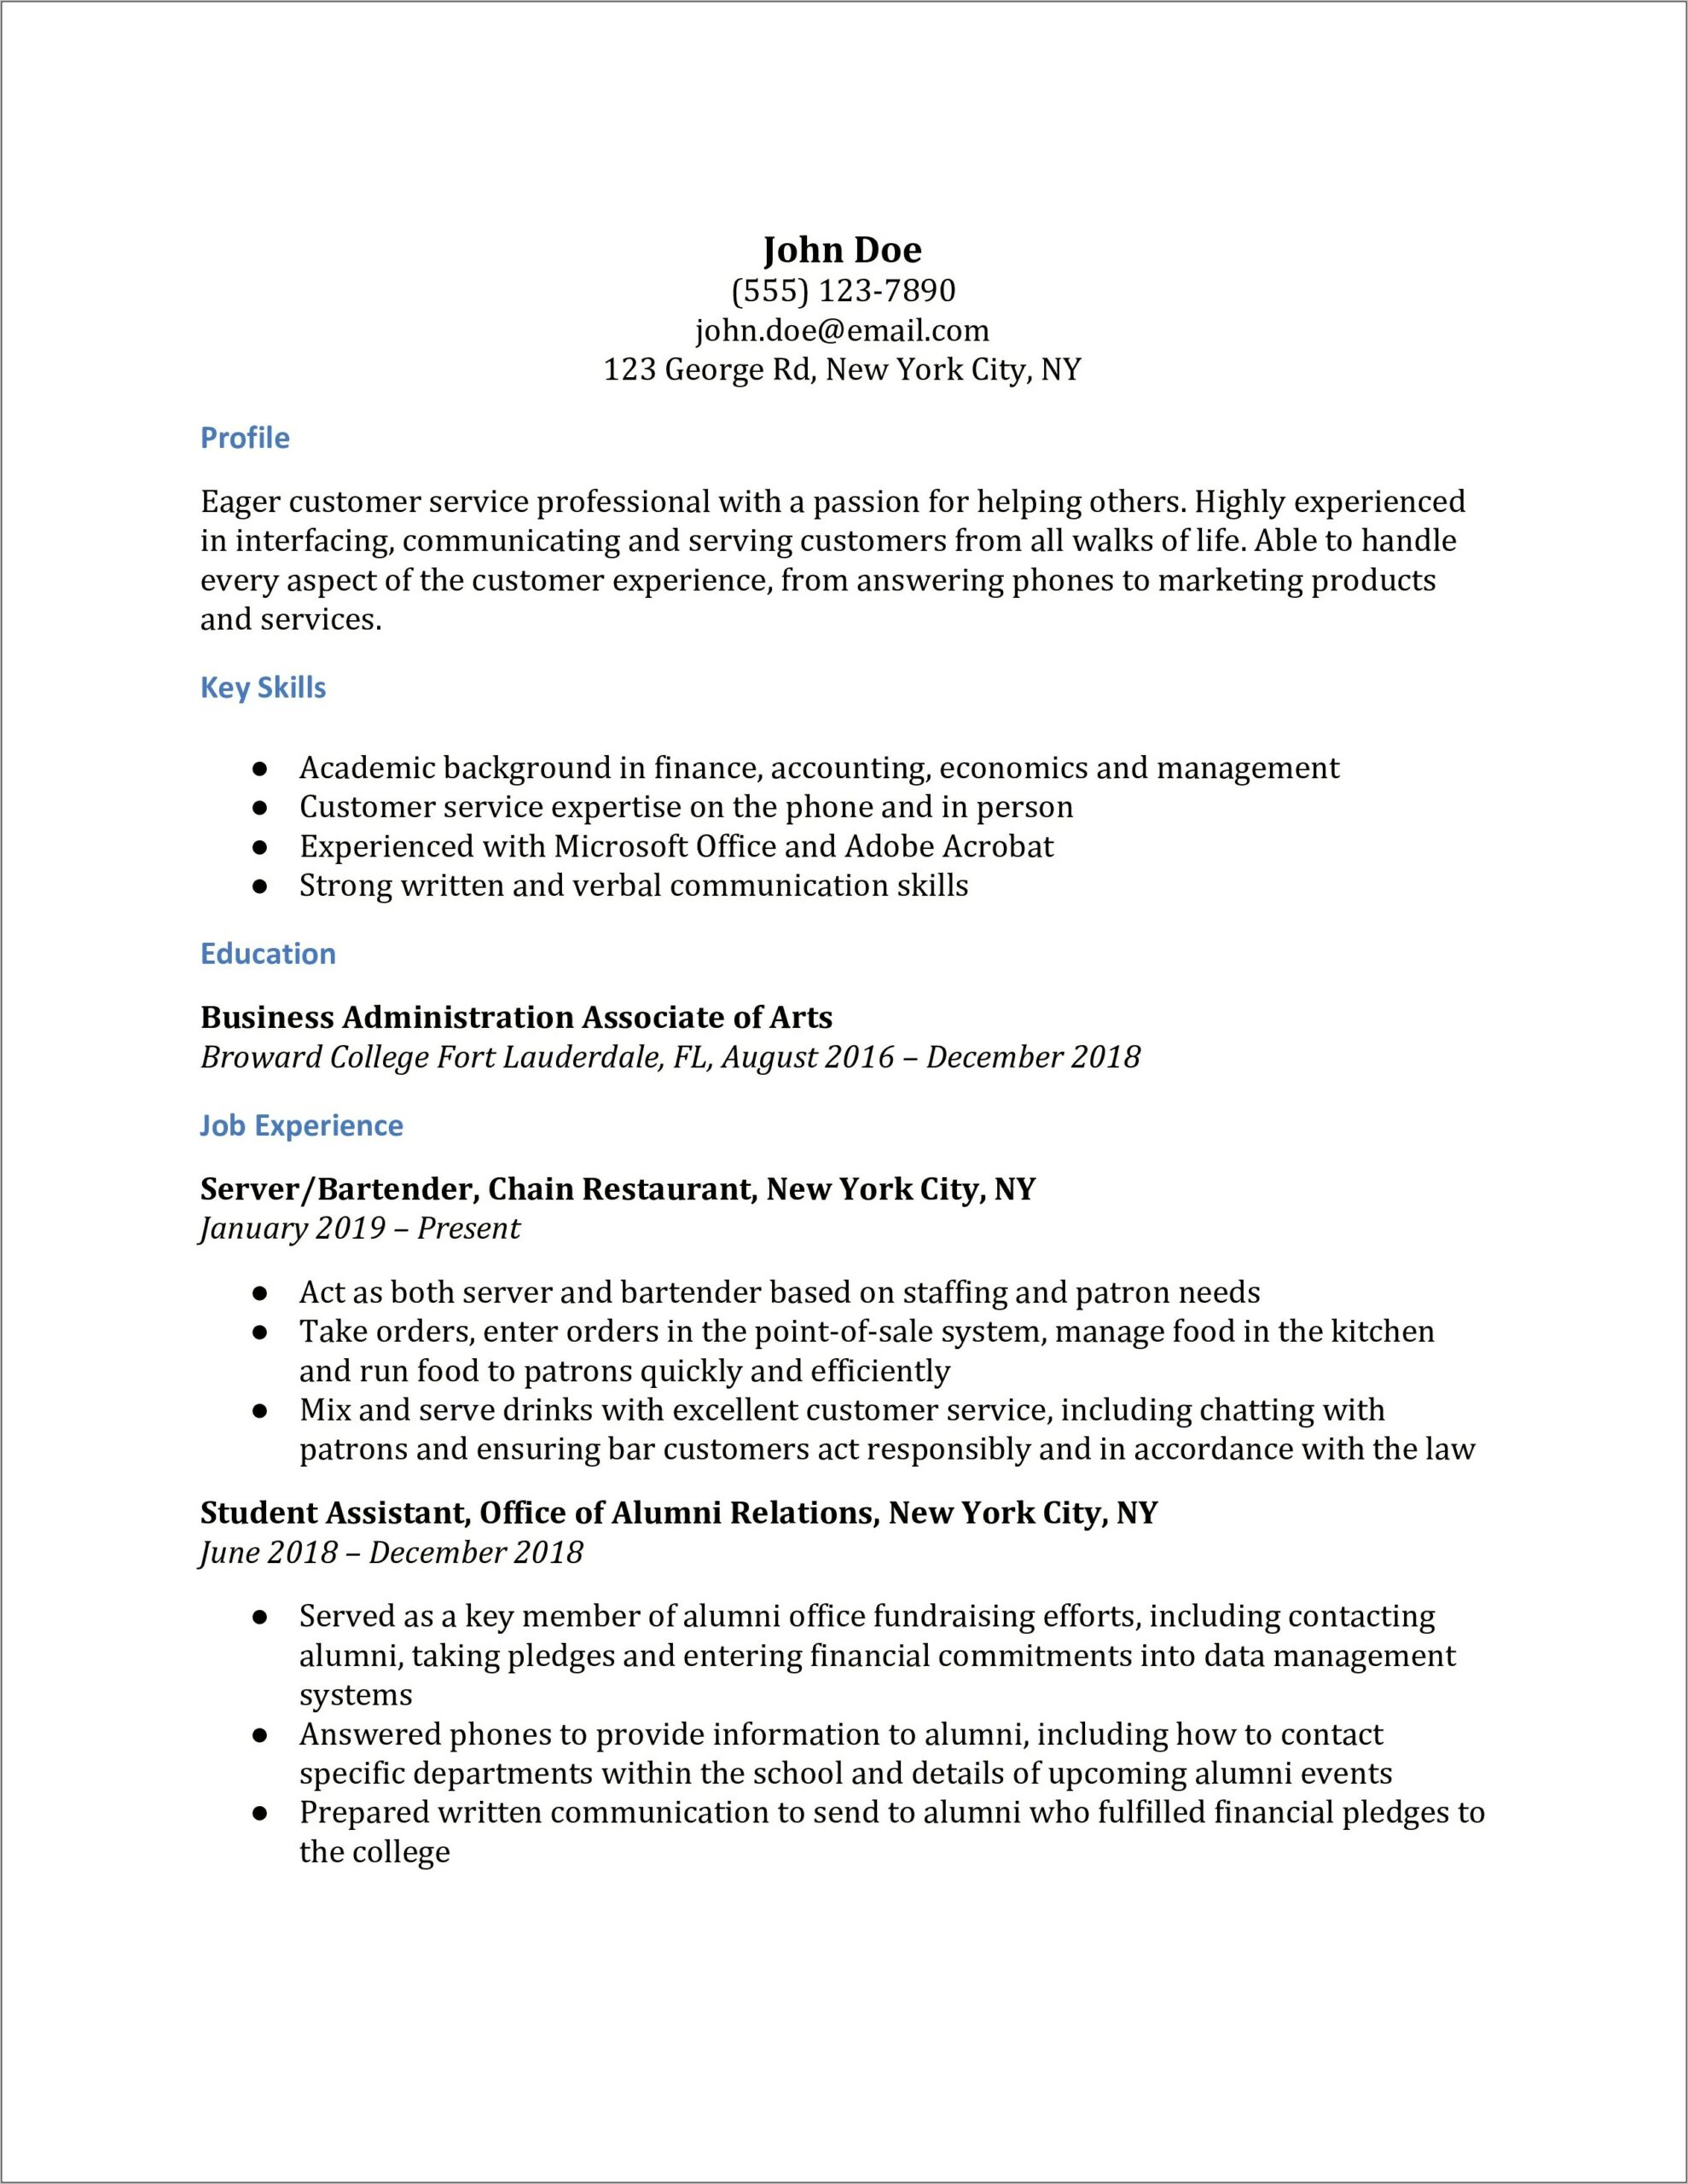 Sample Resume For Administrative Assistant With No Experience